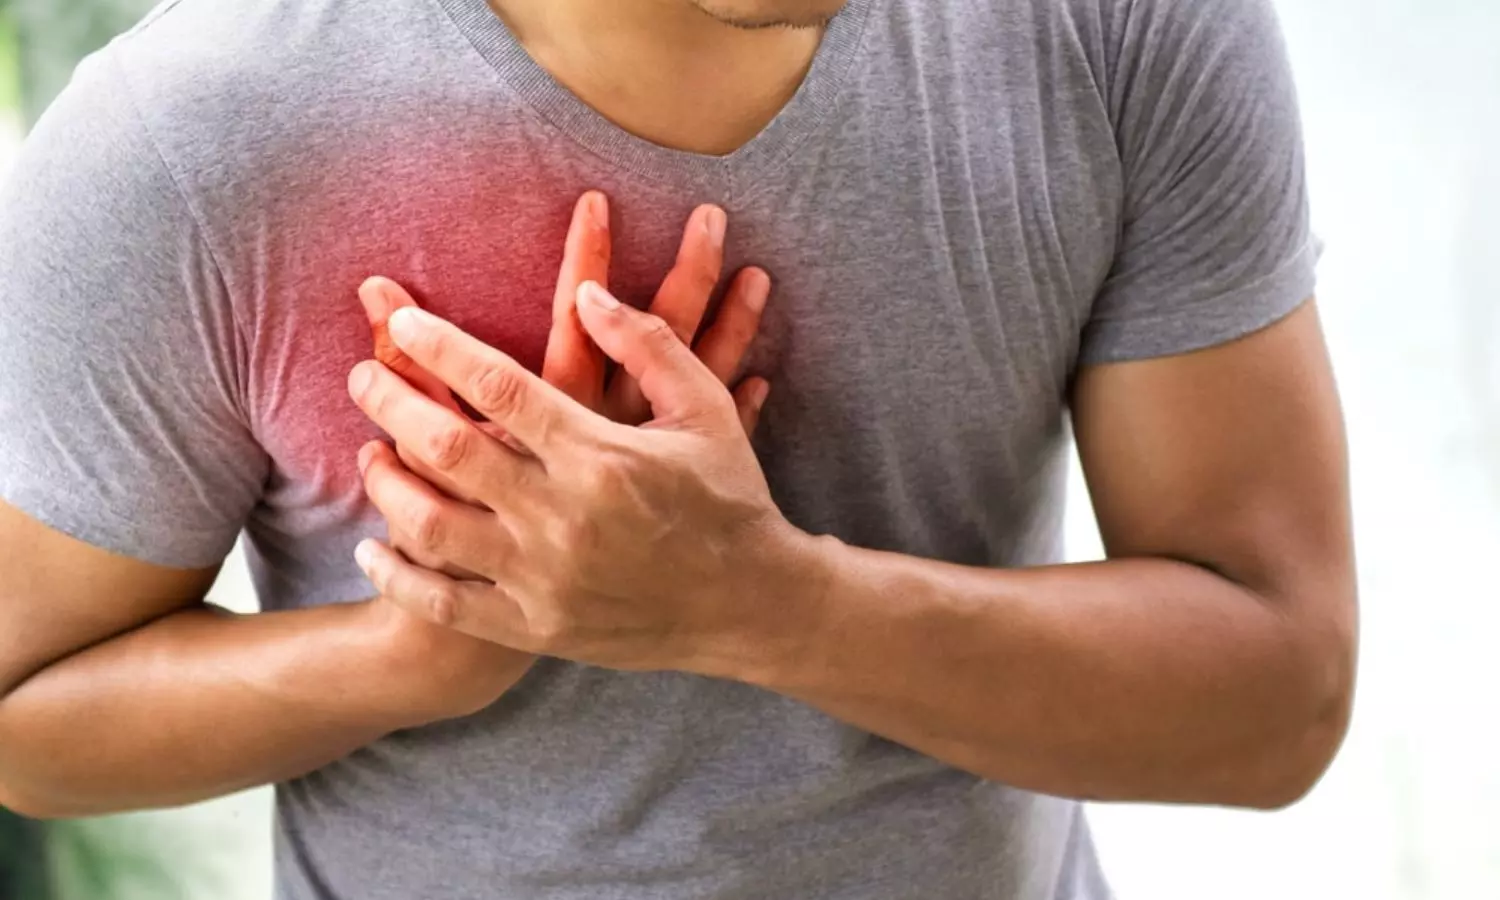 Chest pain and dyspnea warning signs of future heart attacks and heart failure